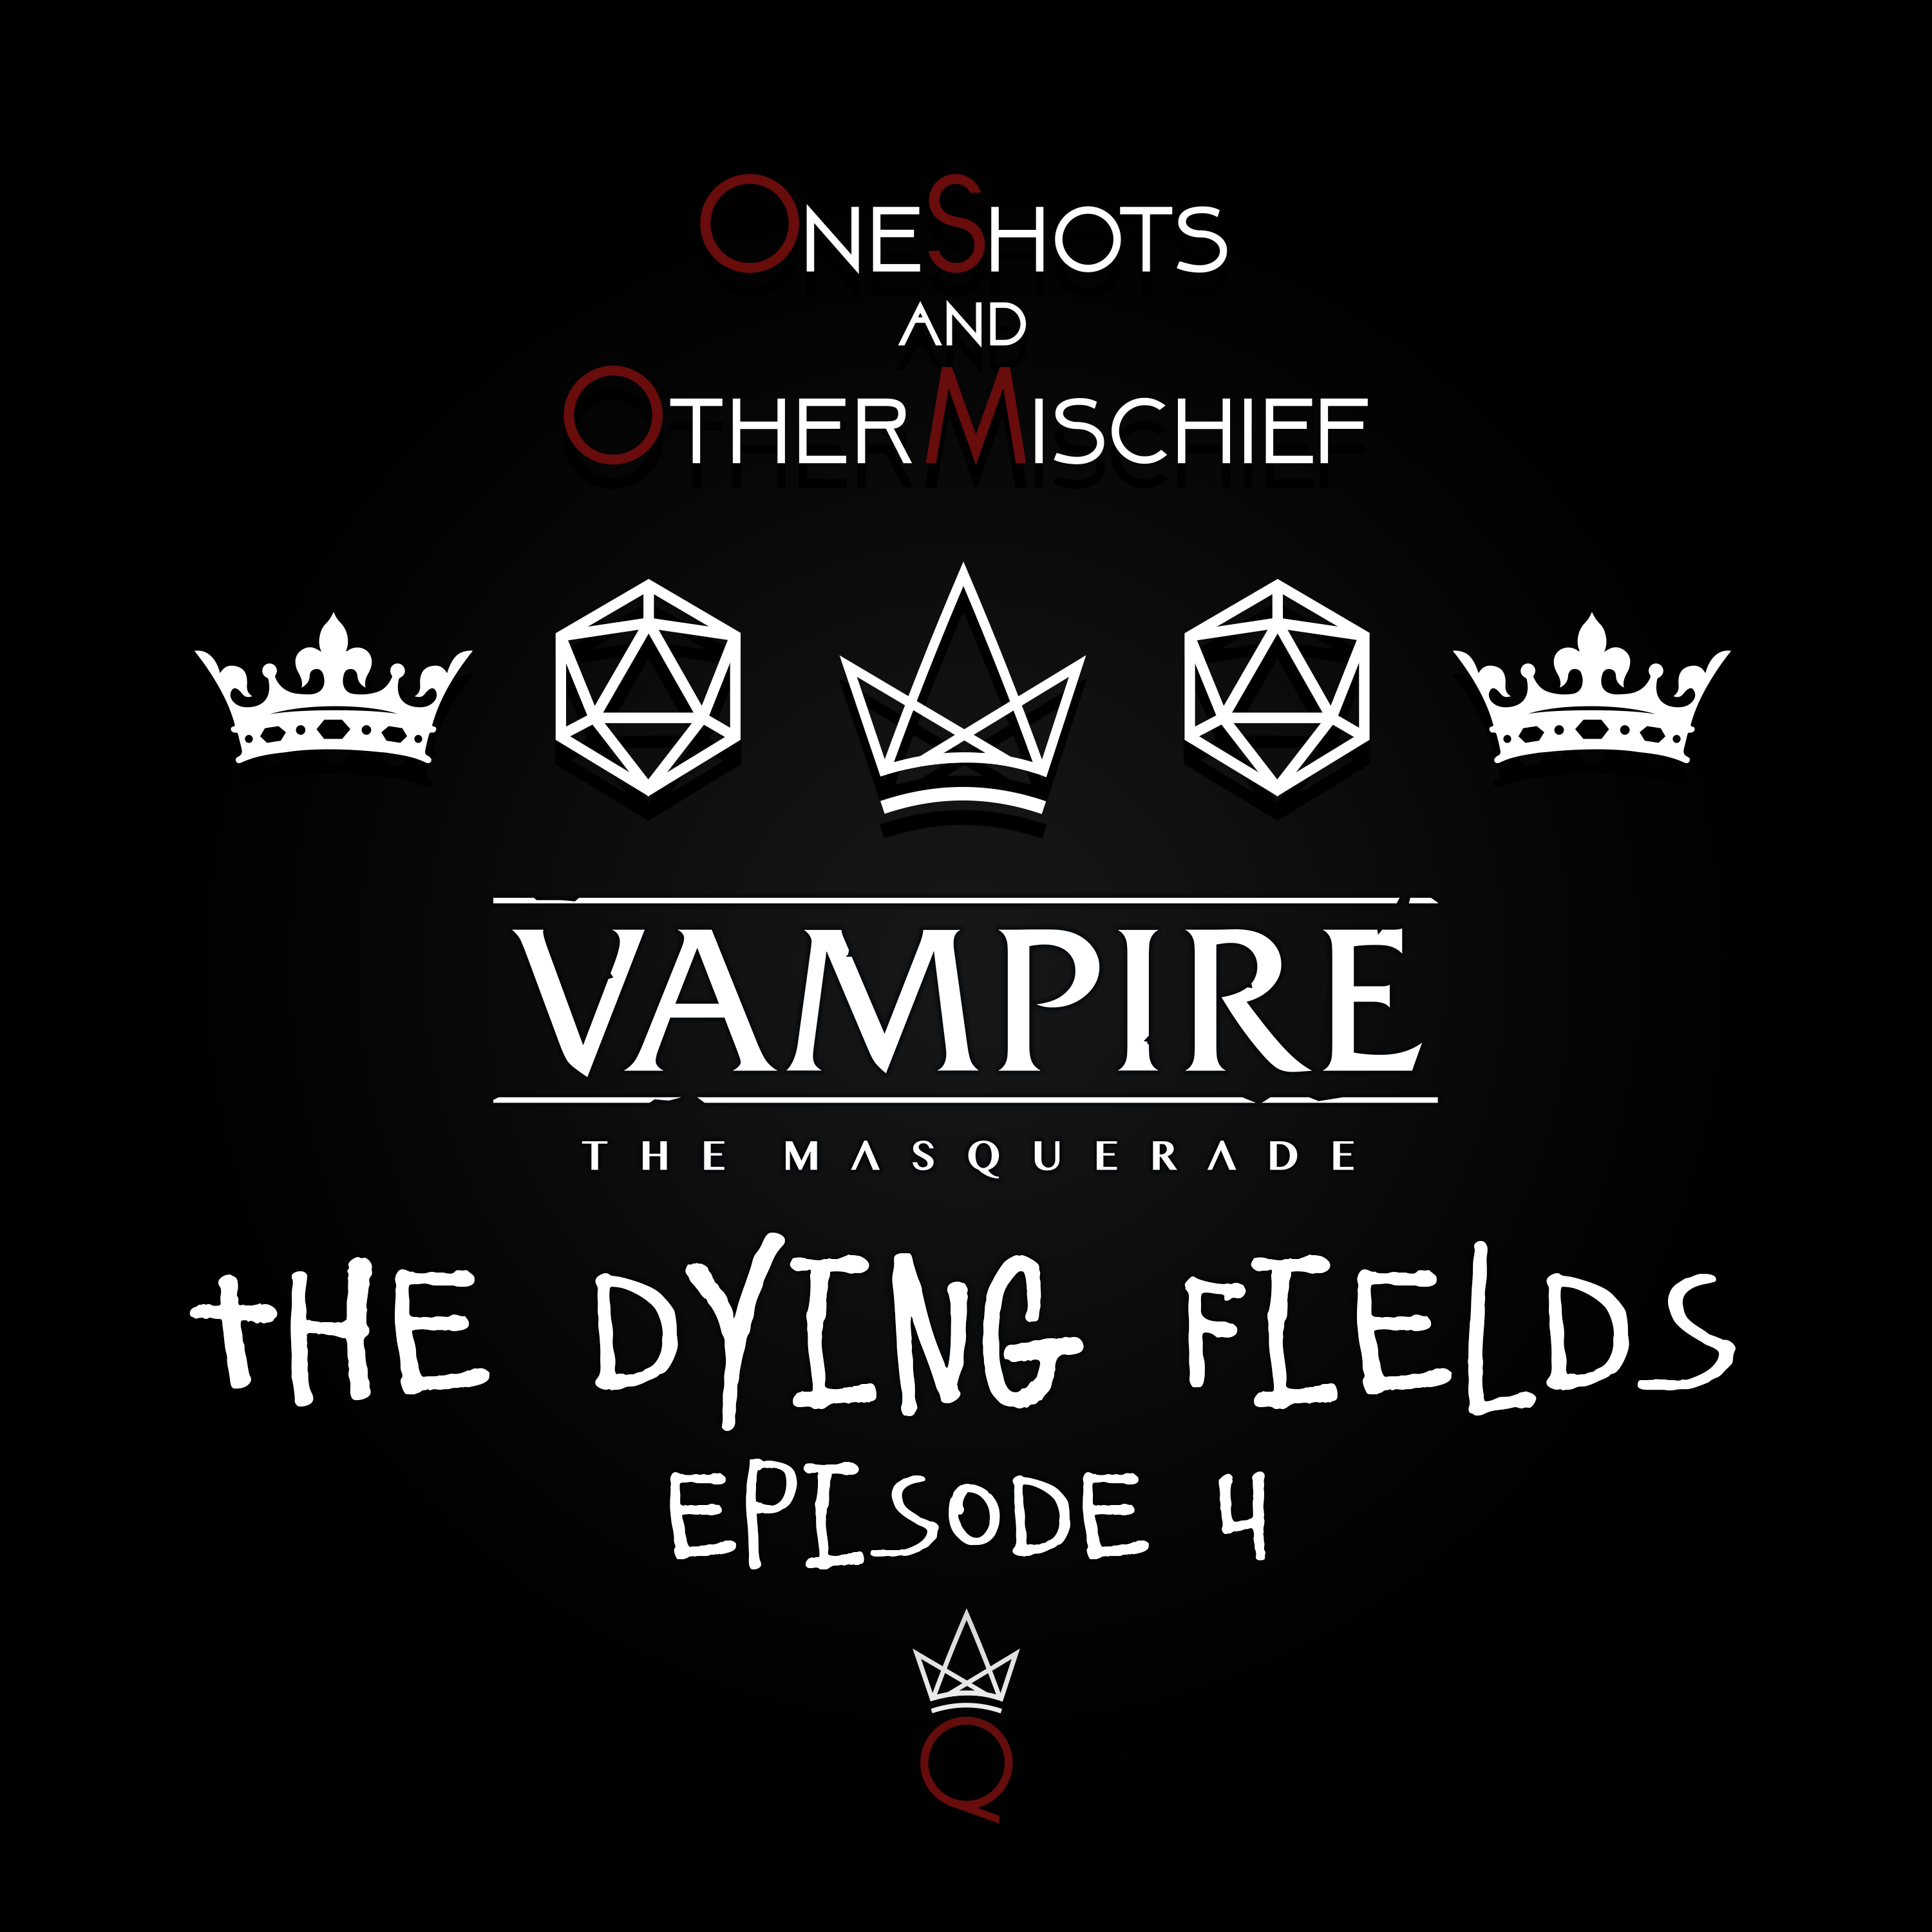 Vampire: The Masquerade - The Dying Fields, Episode 4